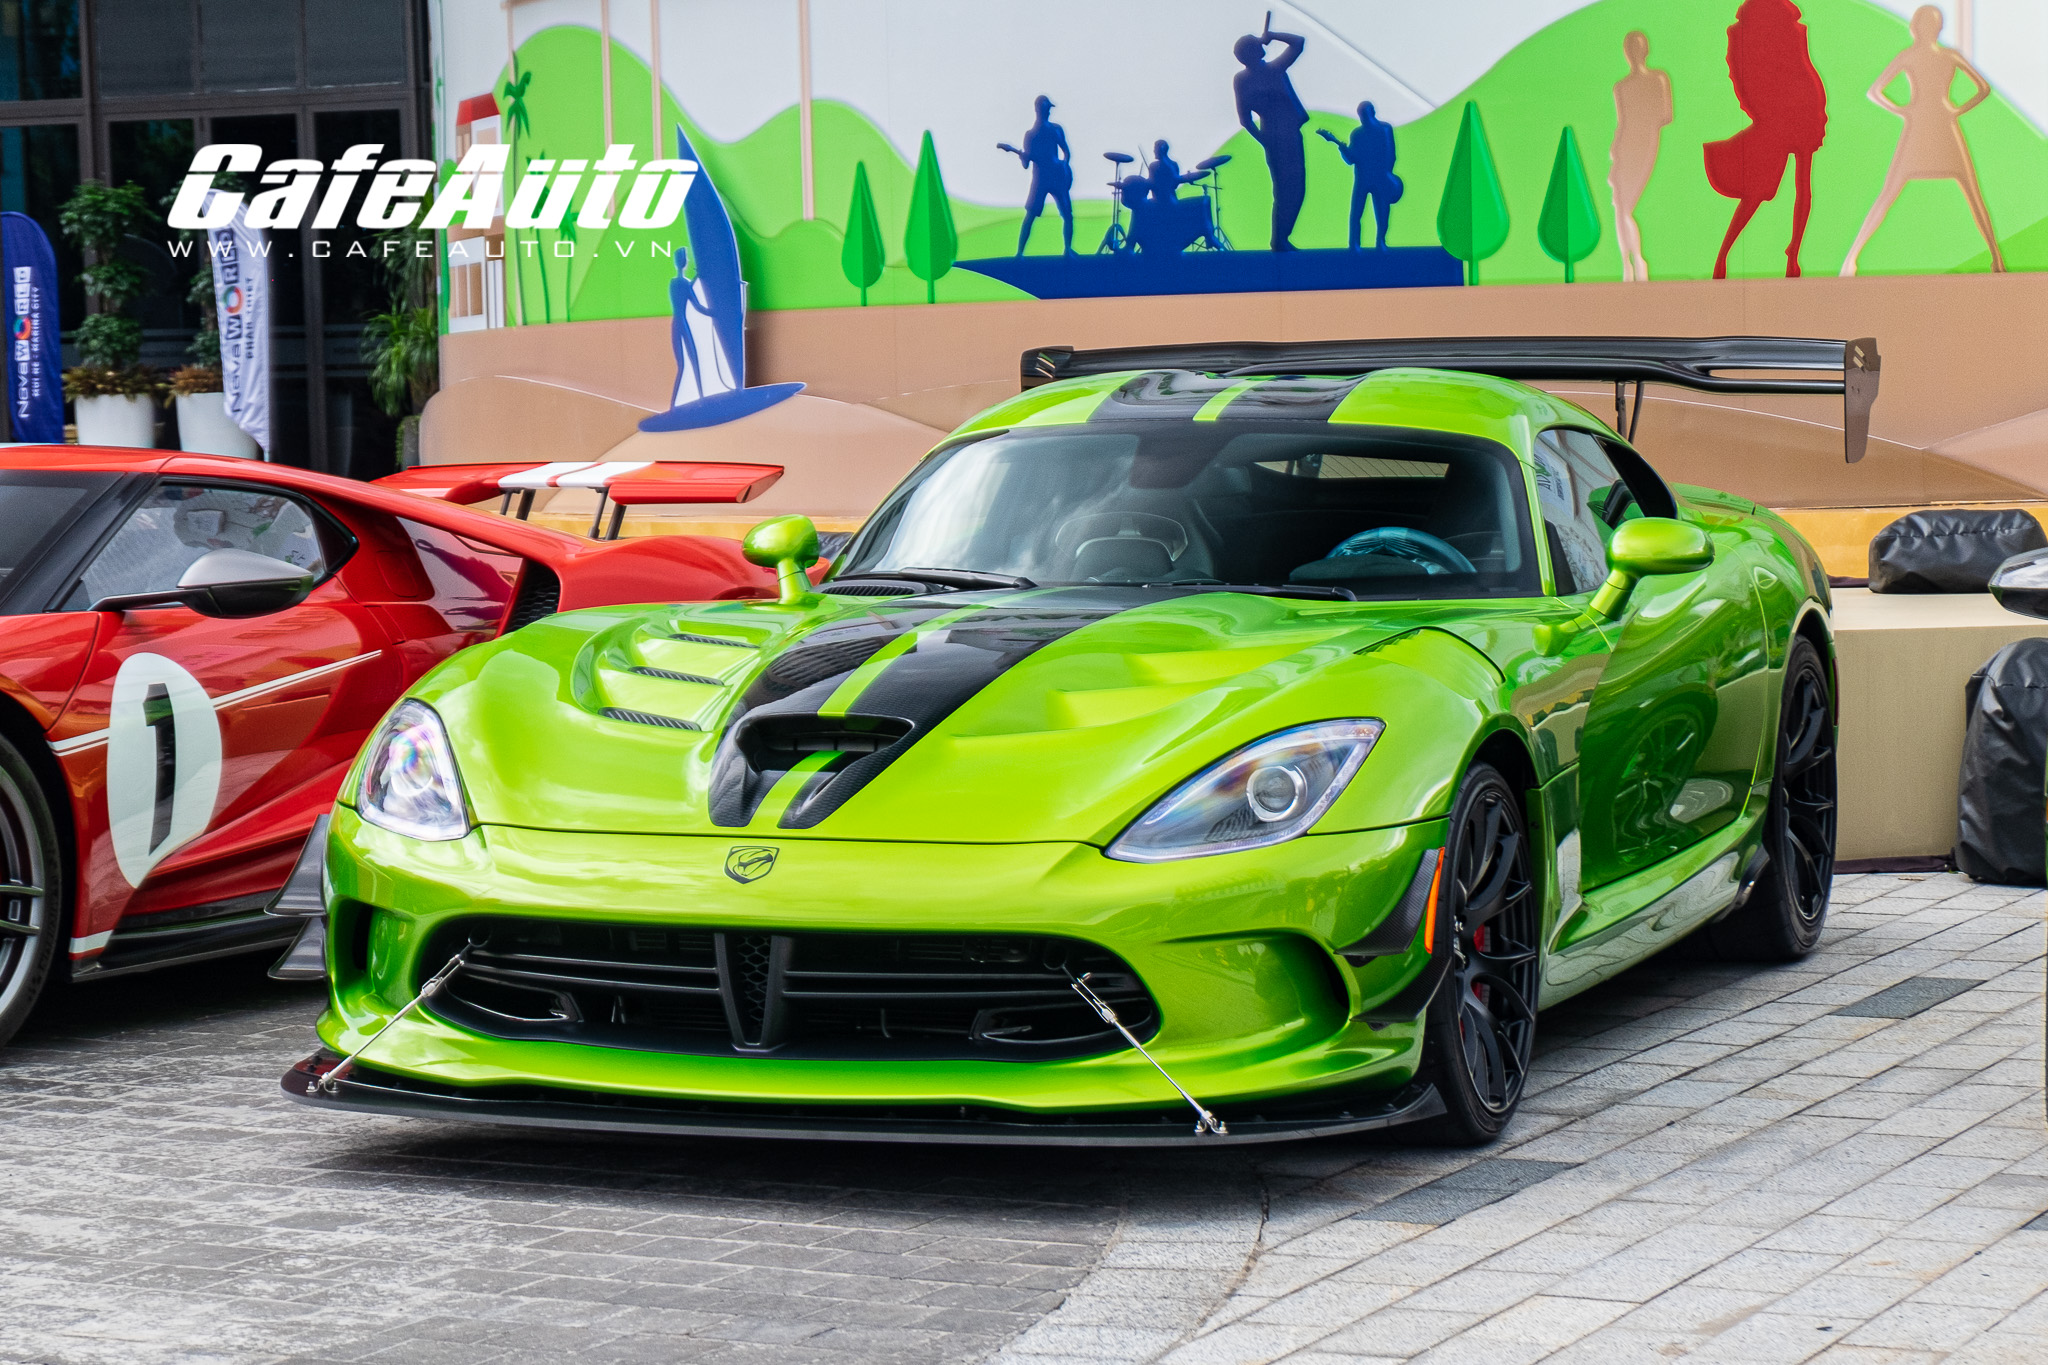 dodge-viper-acr-the-he-moi-doc-nhat-cafeautovn-14